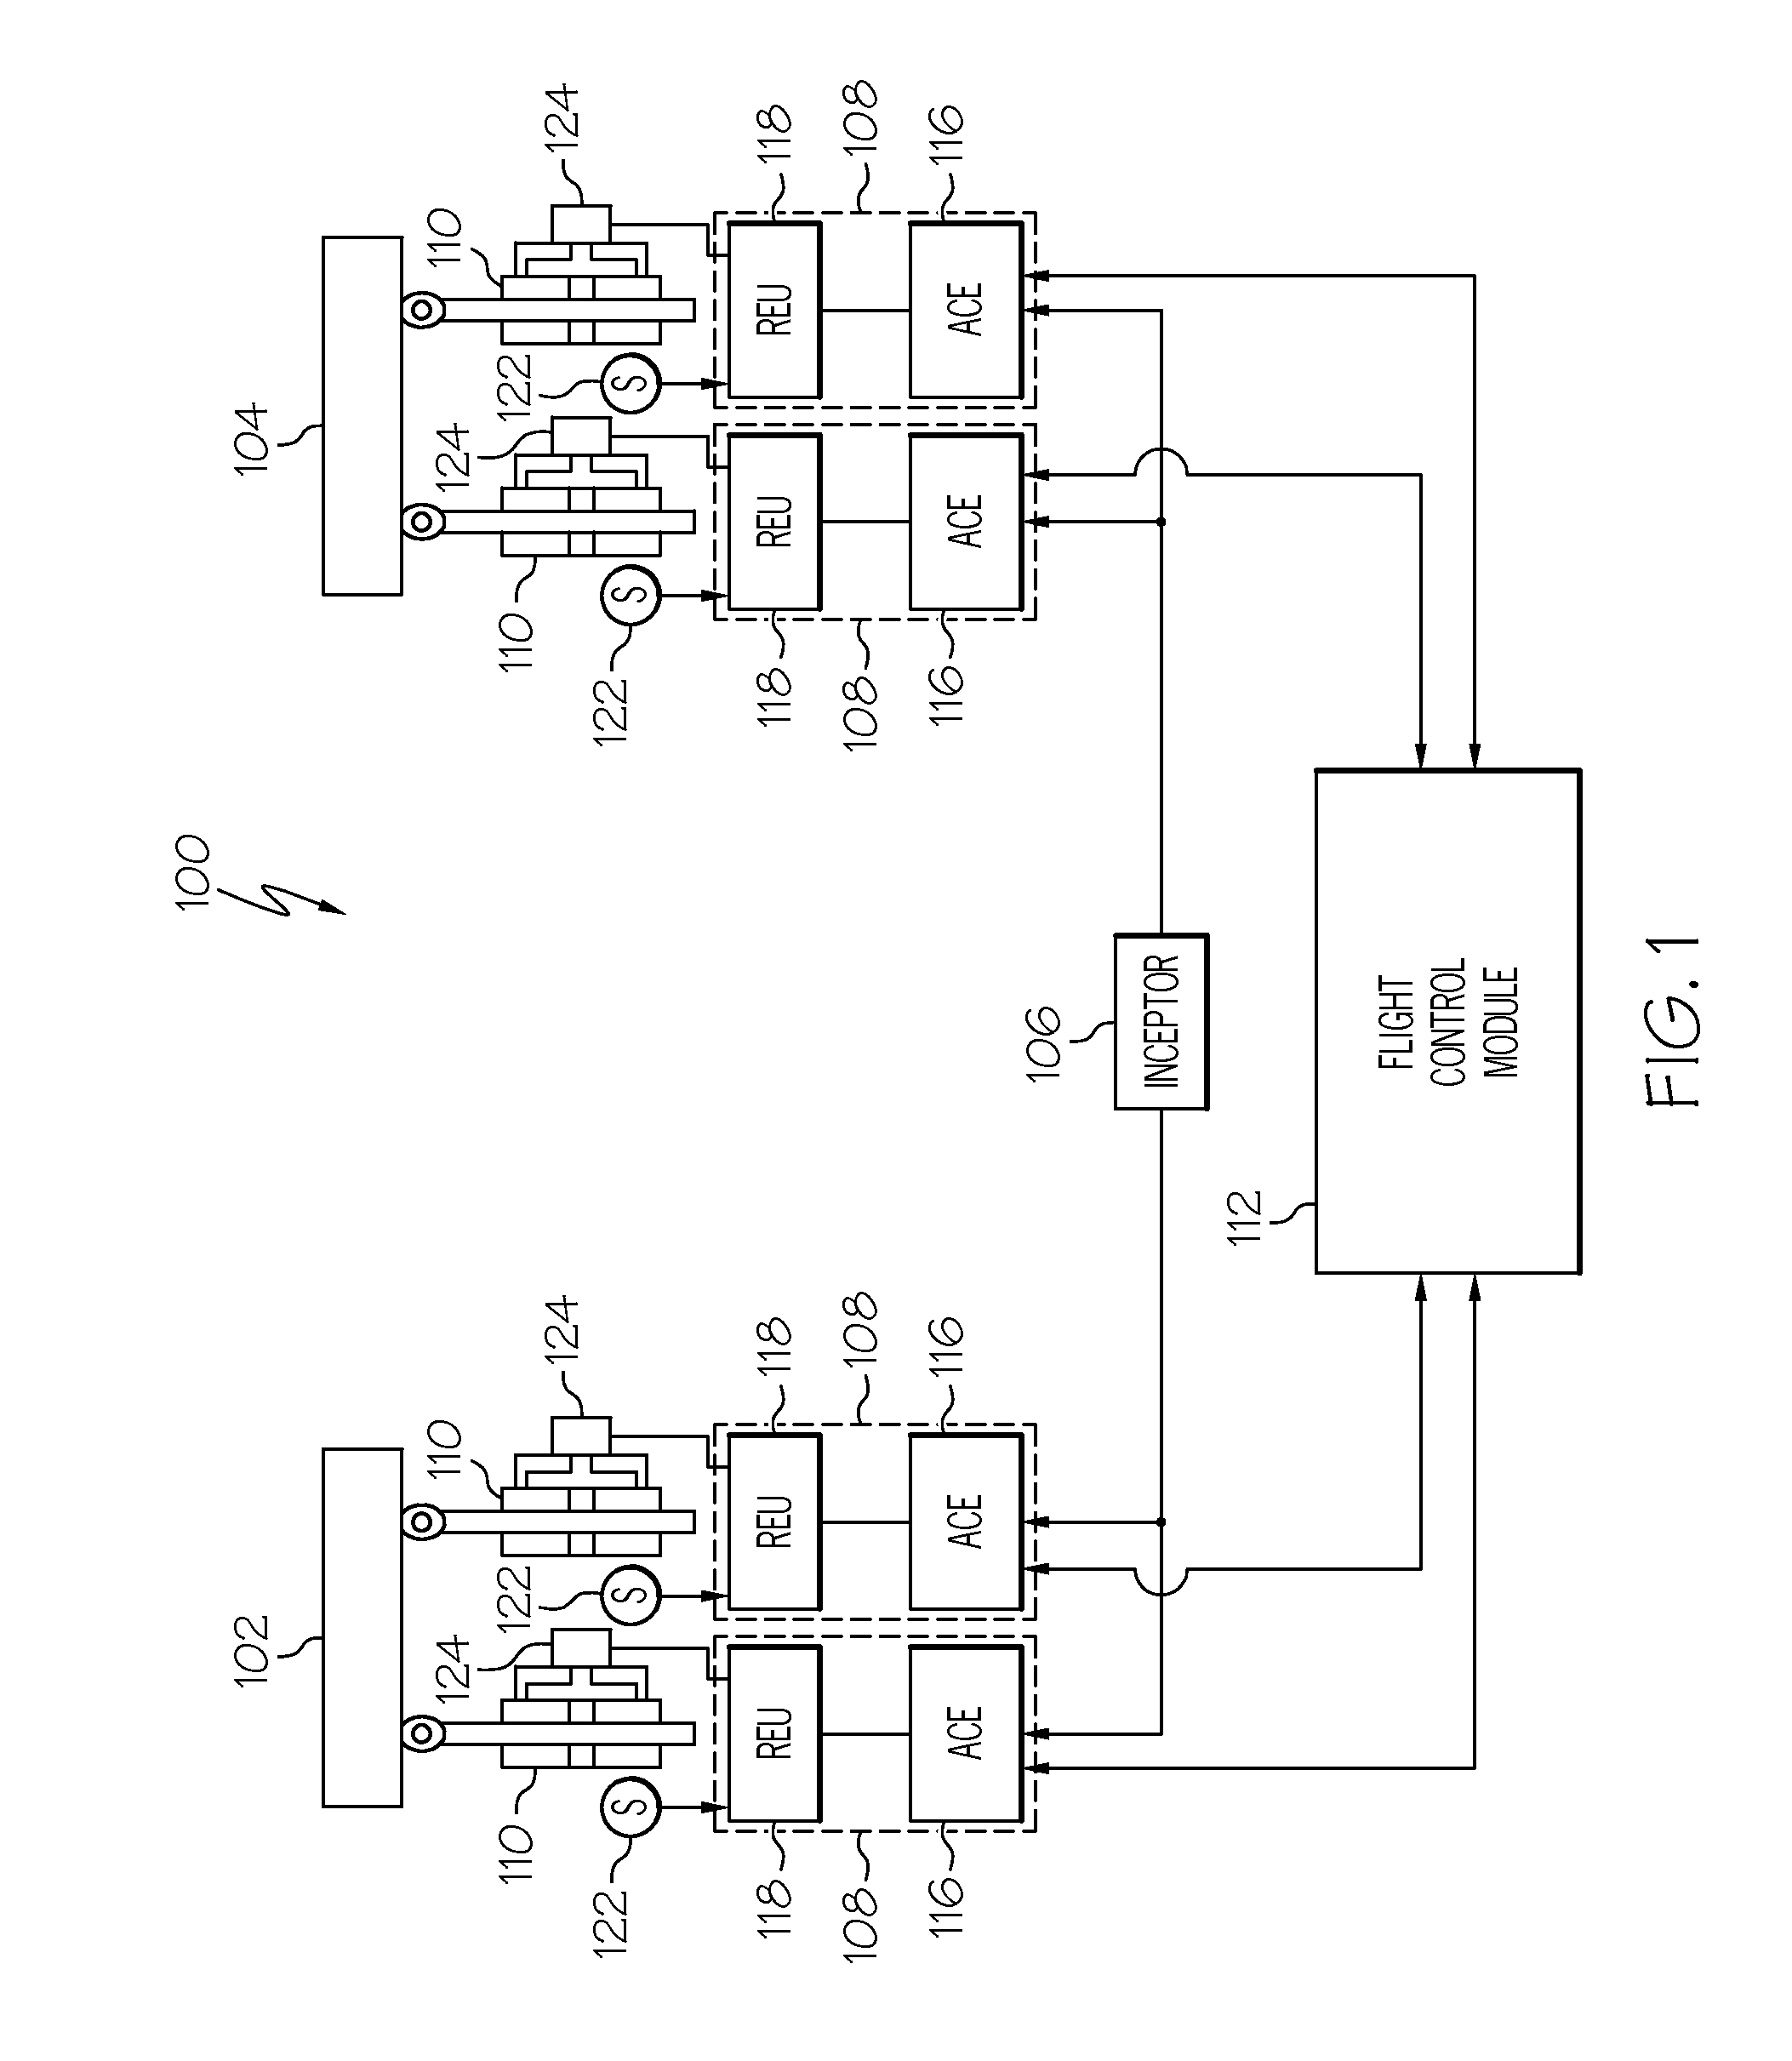 Aircraft dynamic pressure estimation system and method